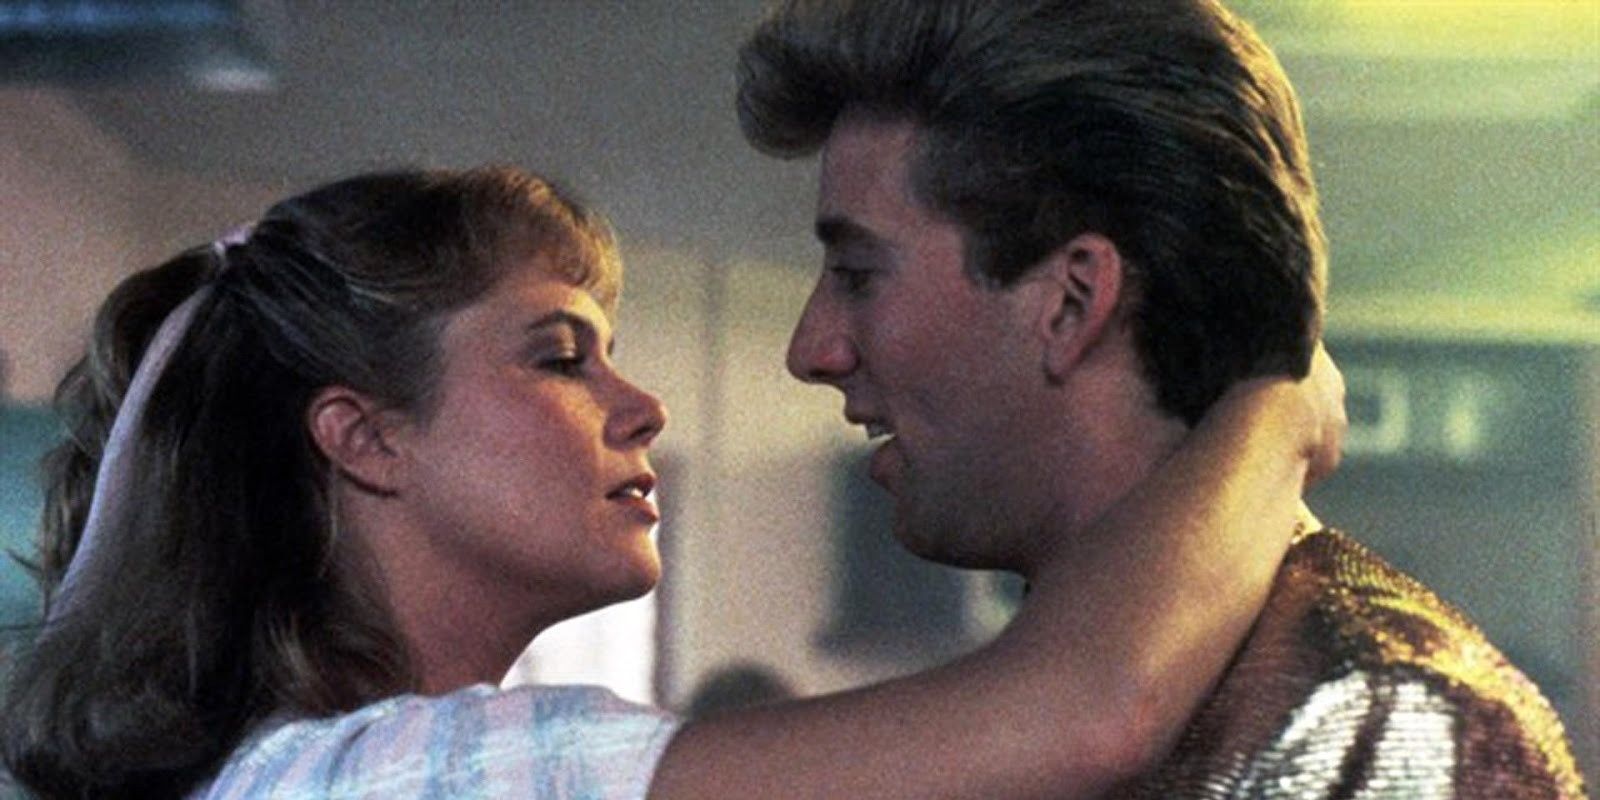 Kathleen Turner going into kiss Nicolas Cage in Peggy Sue Got Married